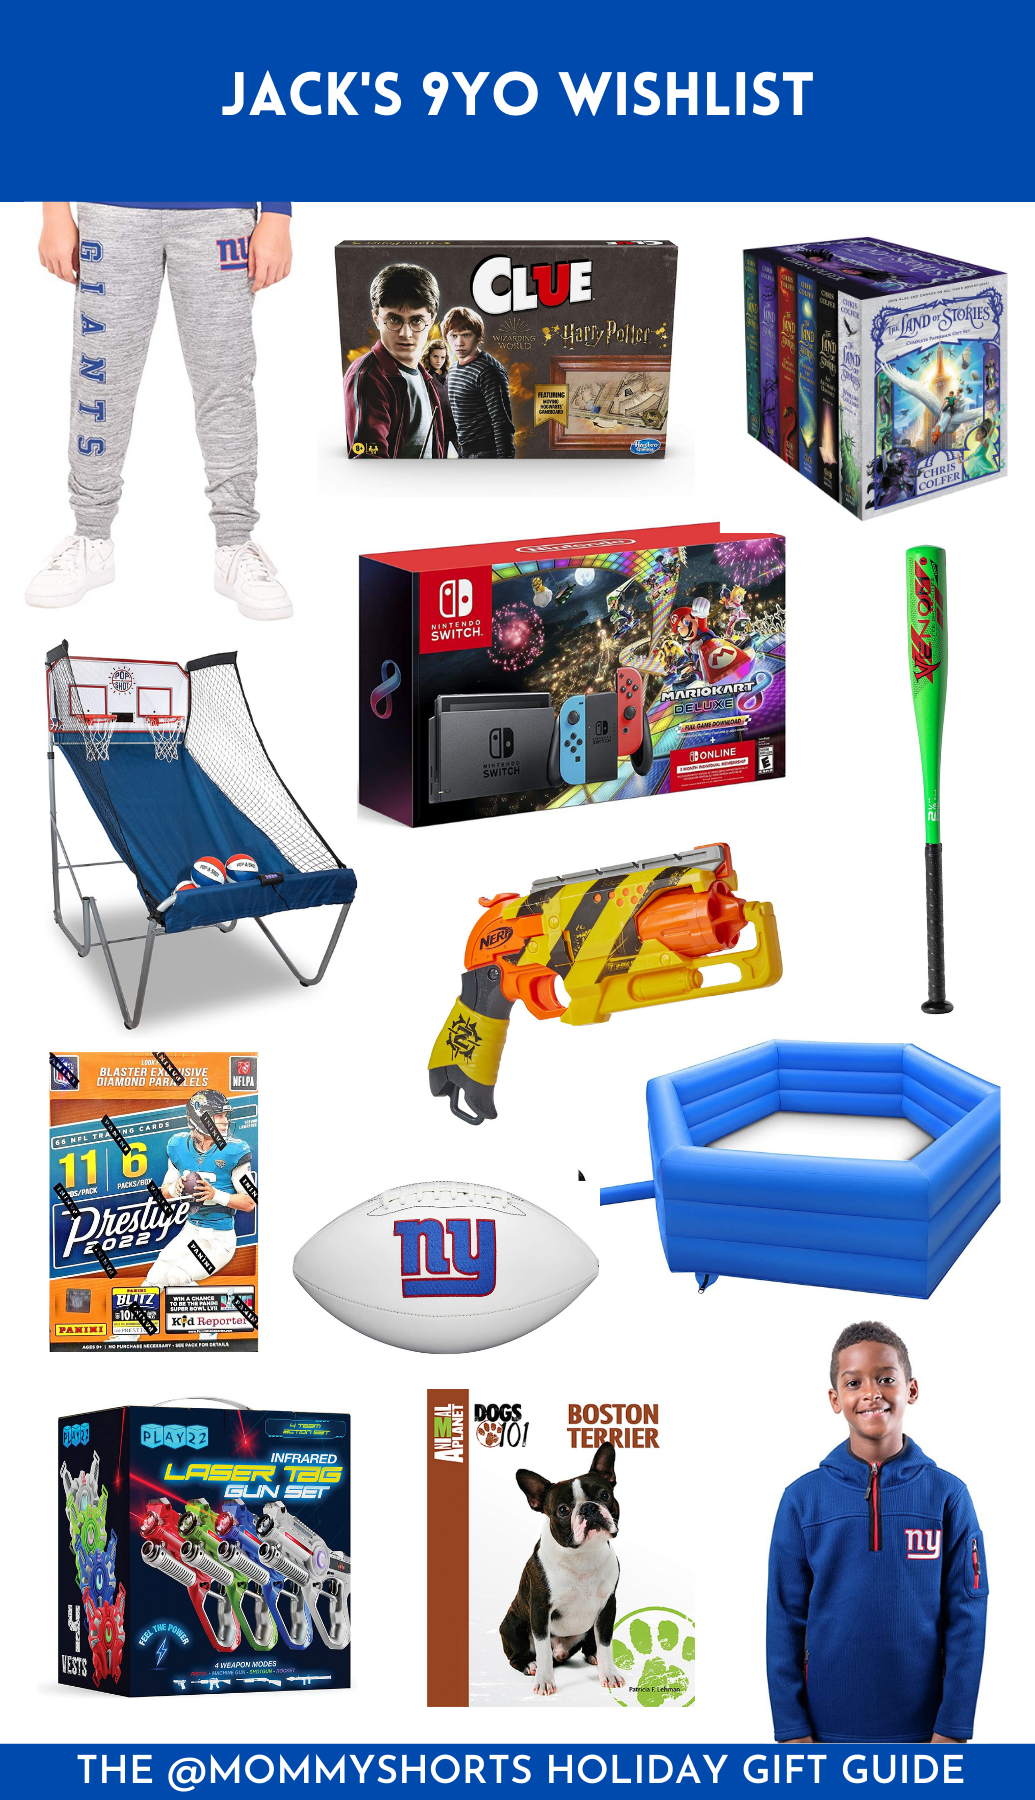 Complete Boys Gift Guide 2022 - Stilettos & Diapers